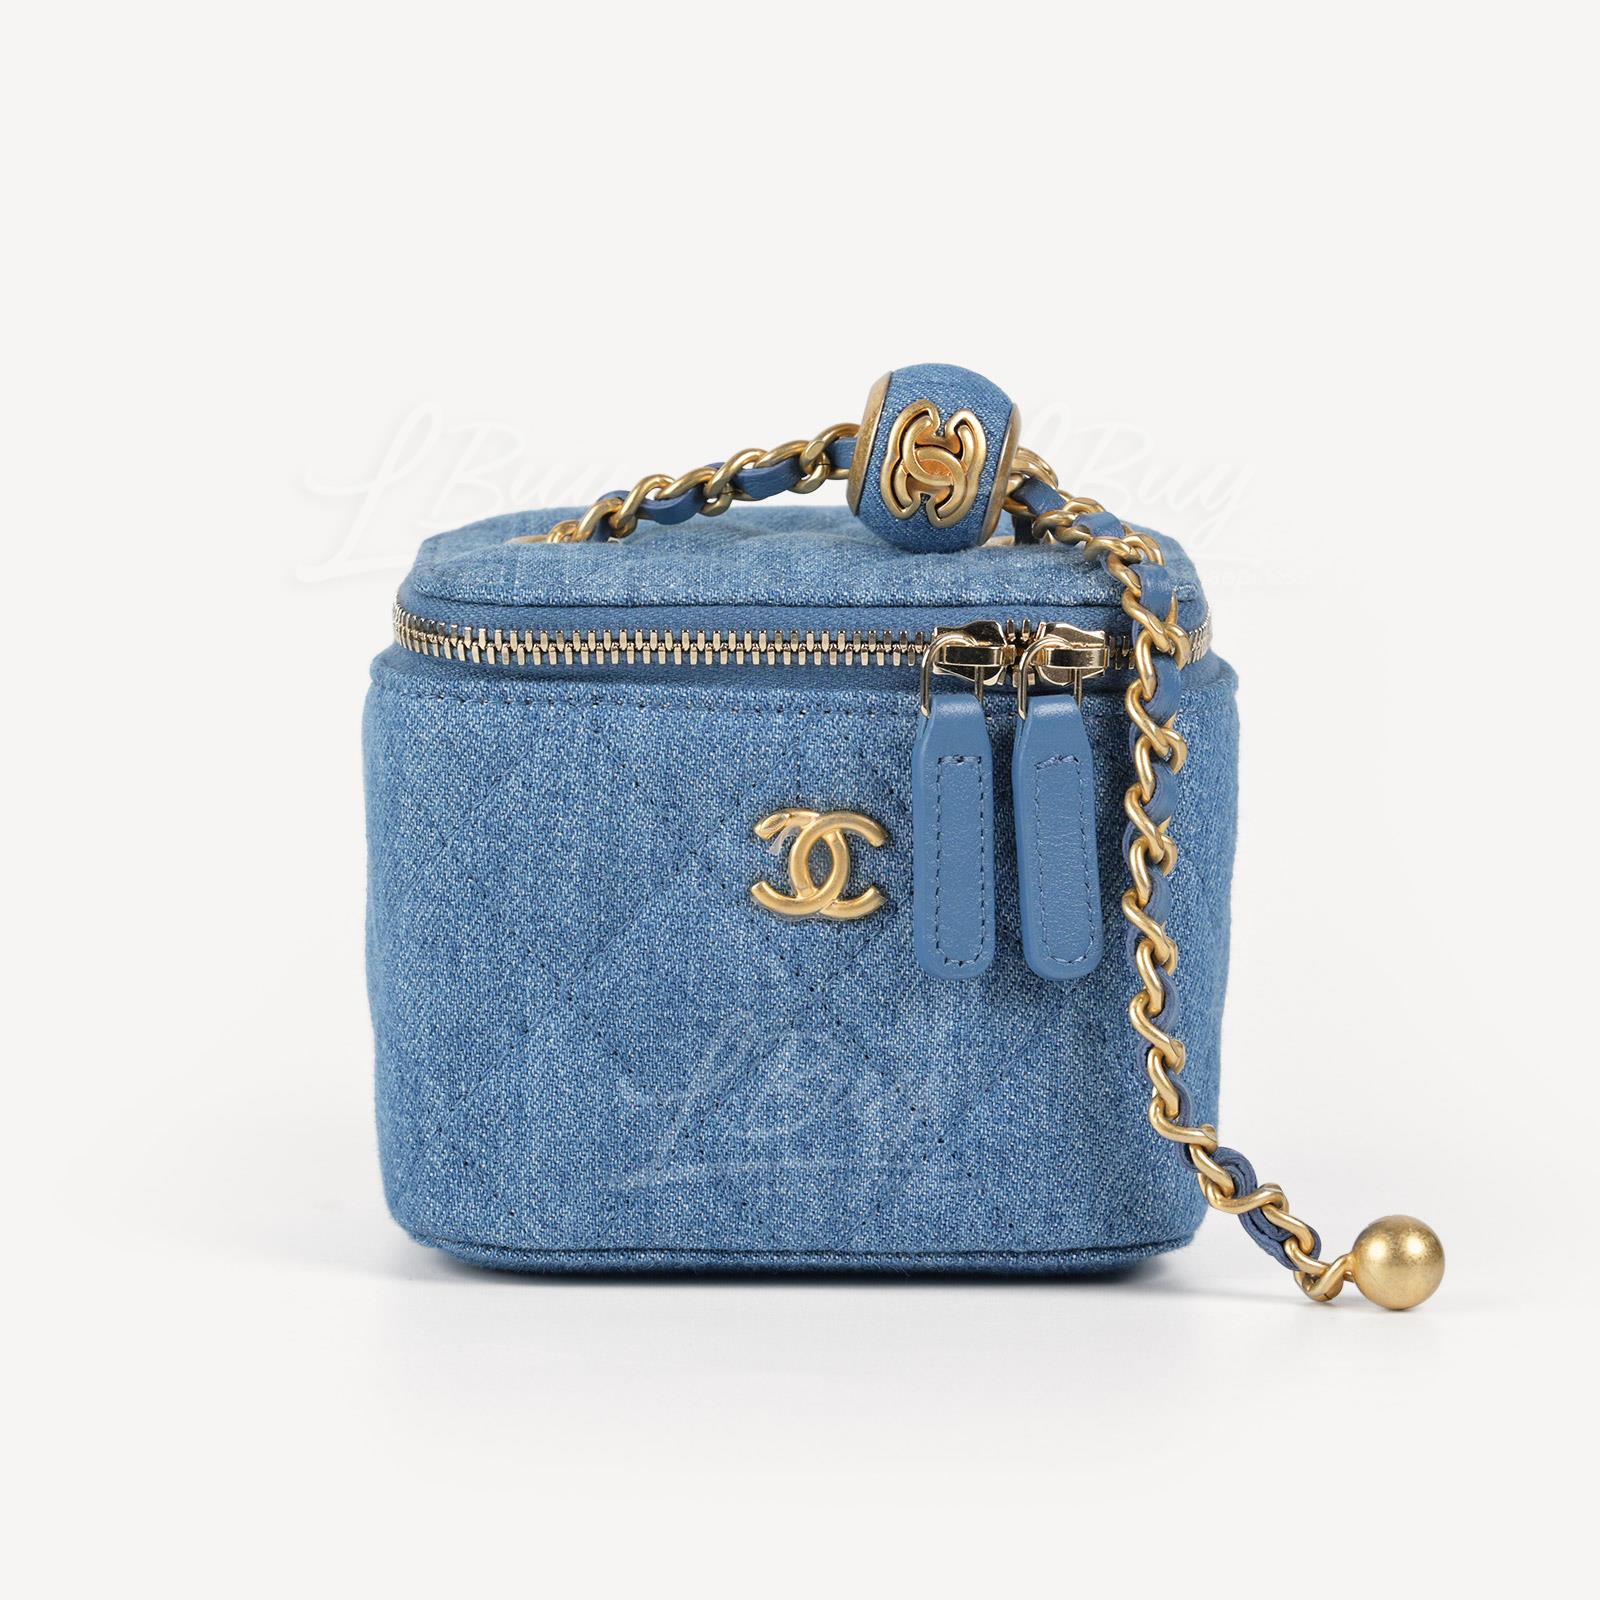 CHANEL-Chanel Classic Small Vanity with Chain in Denim Blue